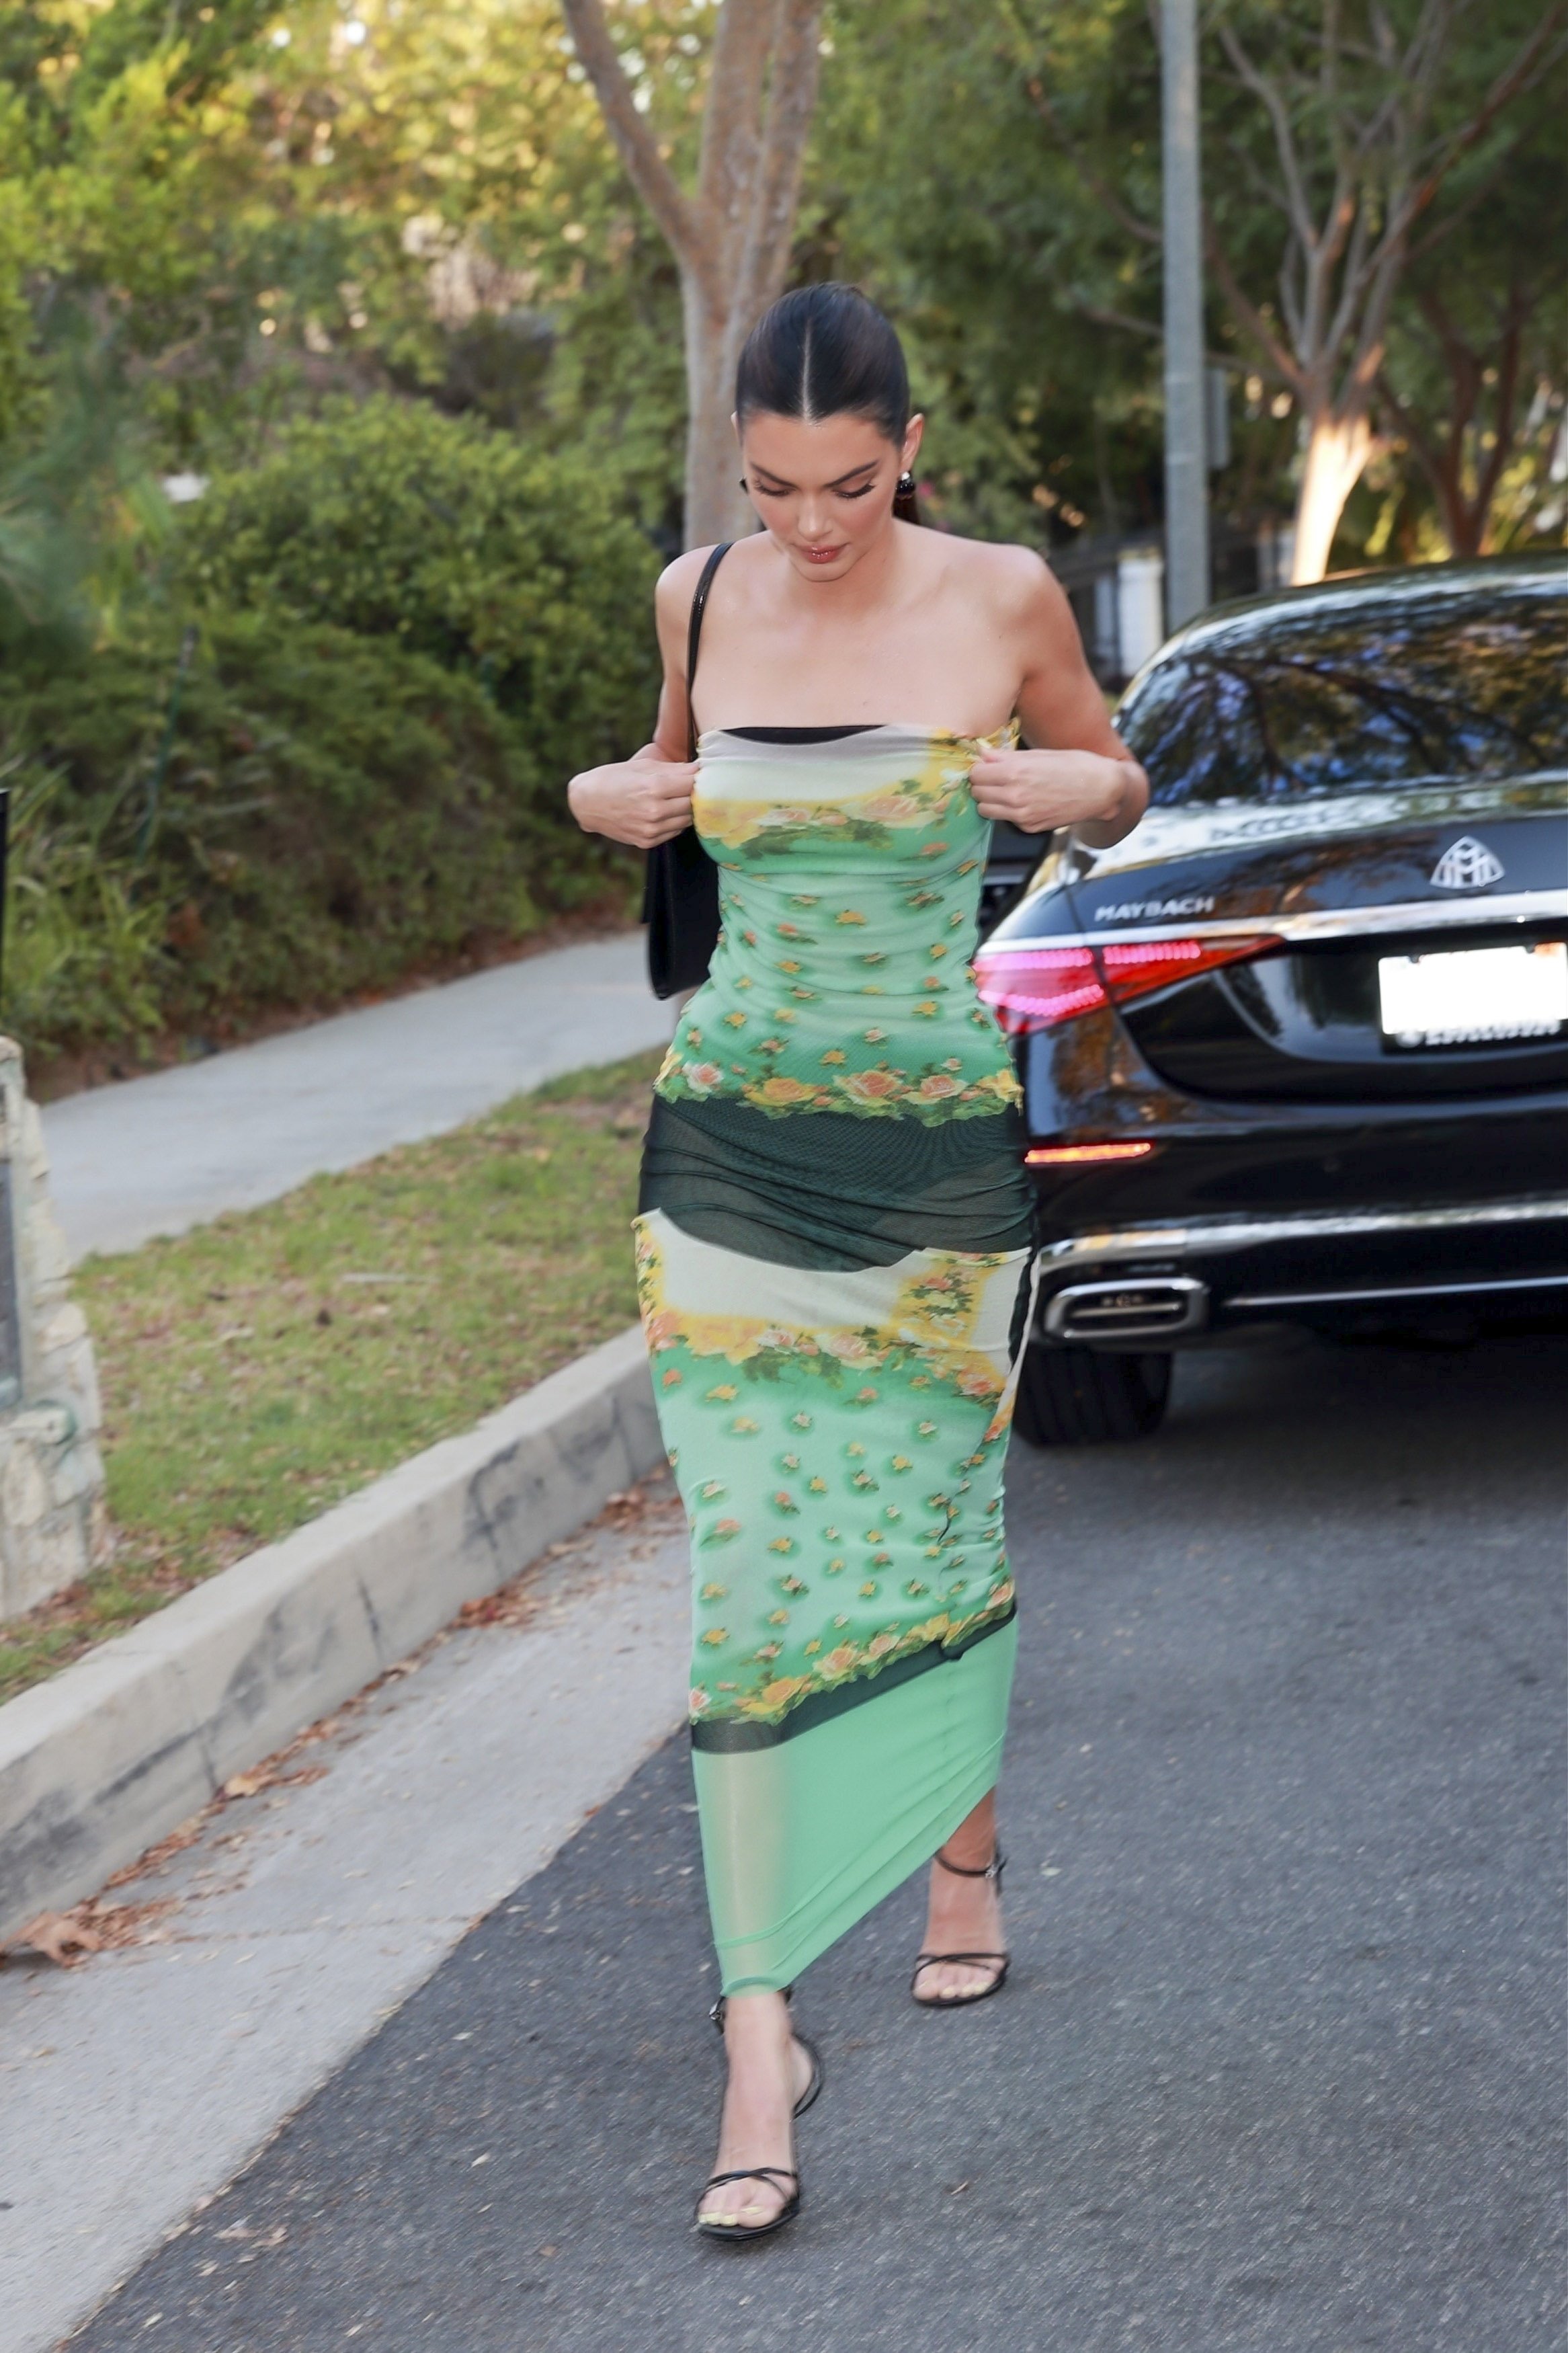 Kendall Jenner tiene su propia marca de tequila (Photo © 2022 Backgrid/The Grosby Group)
